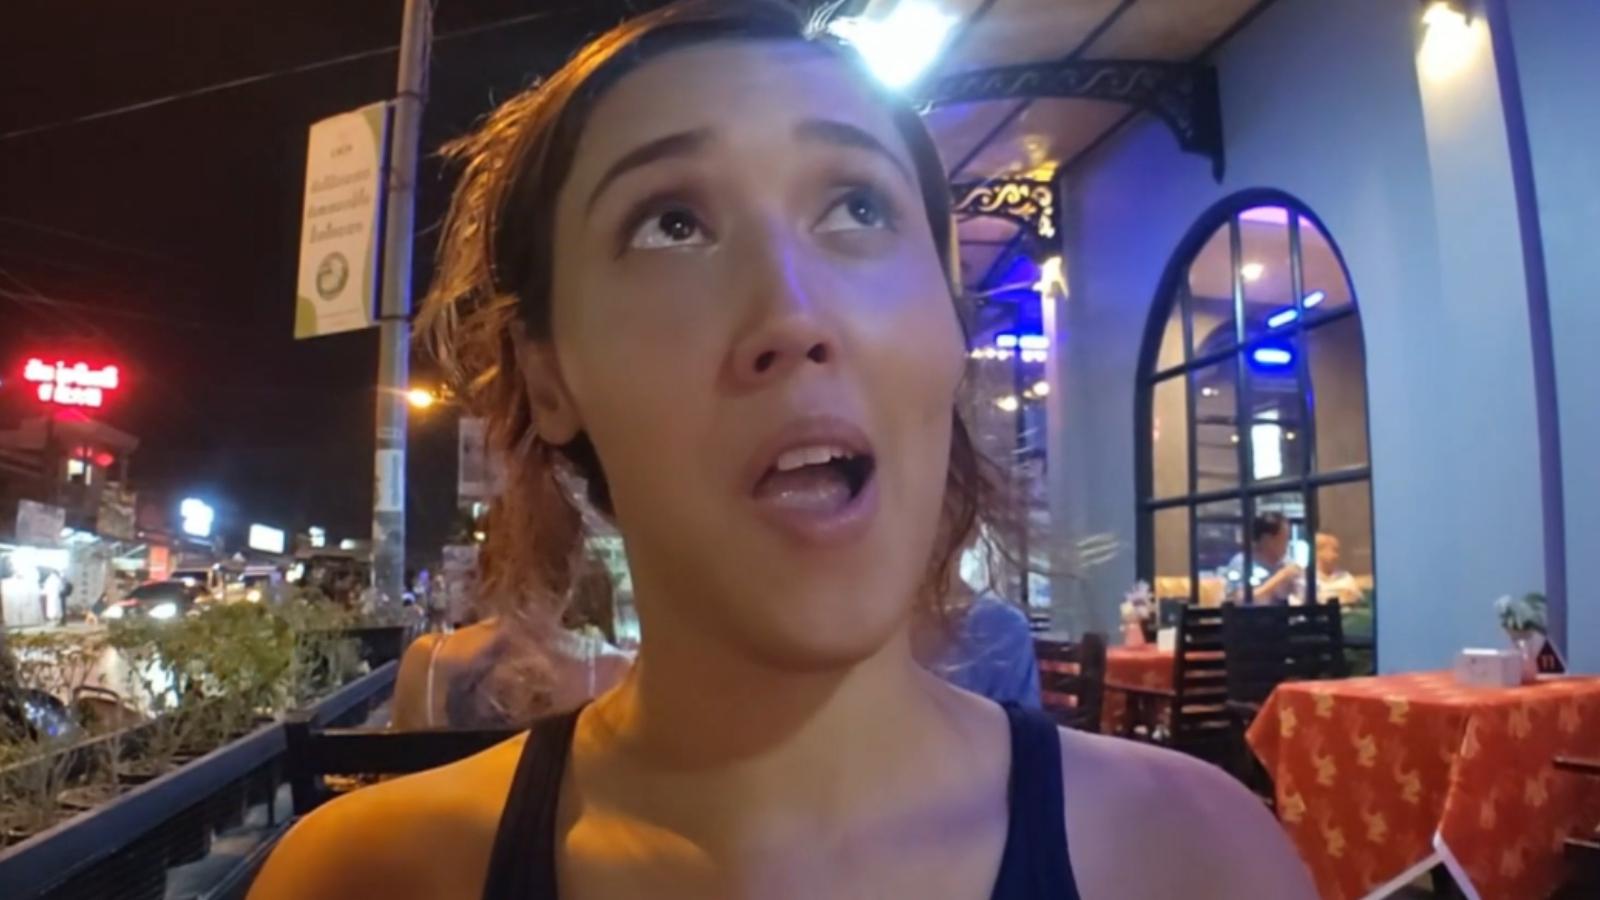 twitch streamer justketh confronted for filming in public